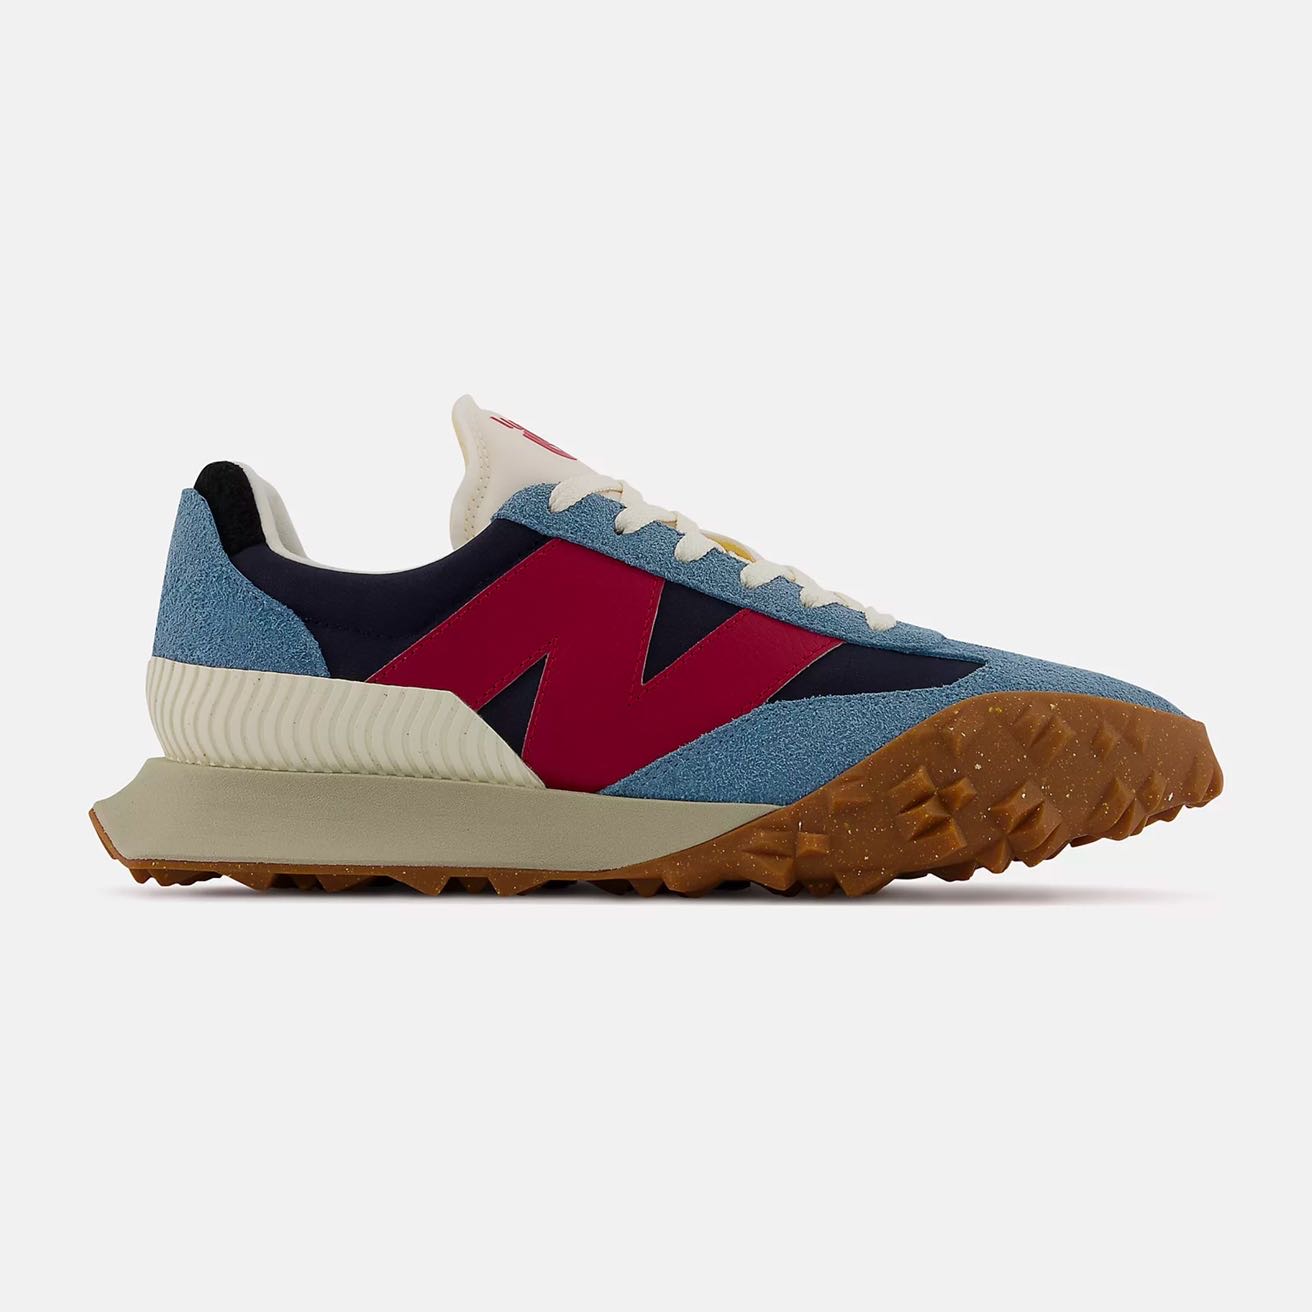 New Balance XC72 Spring tide with eclipse